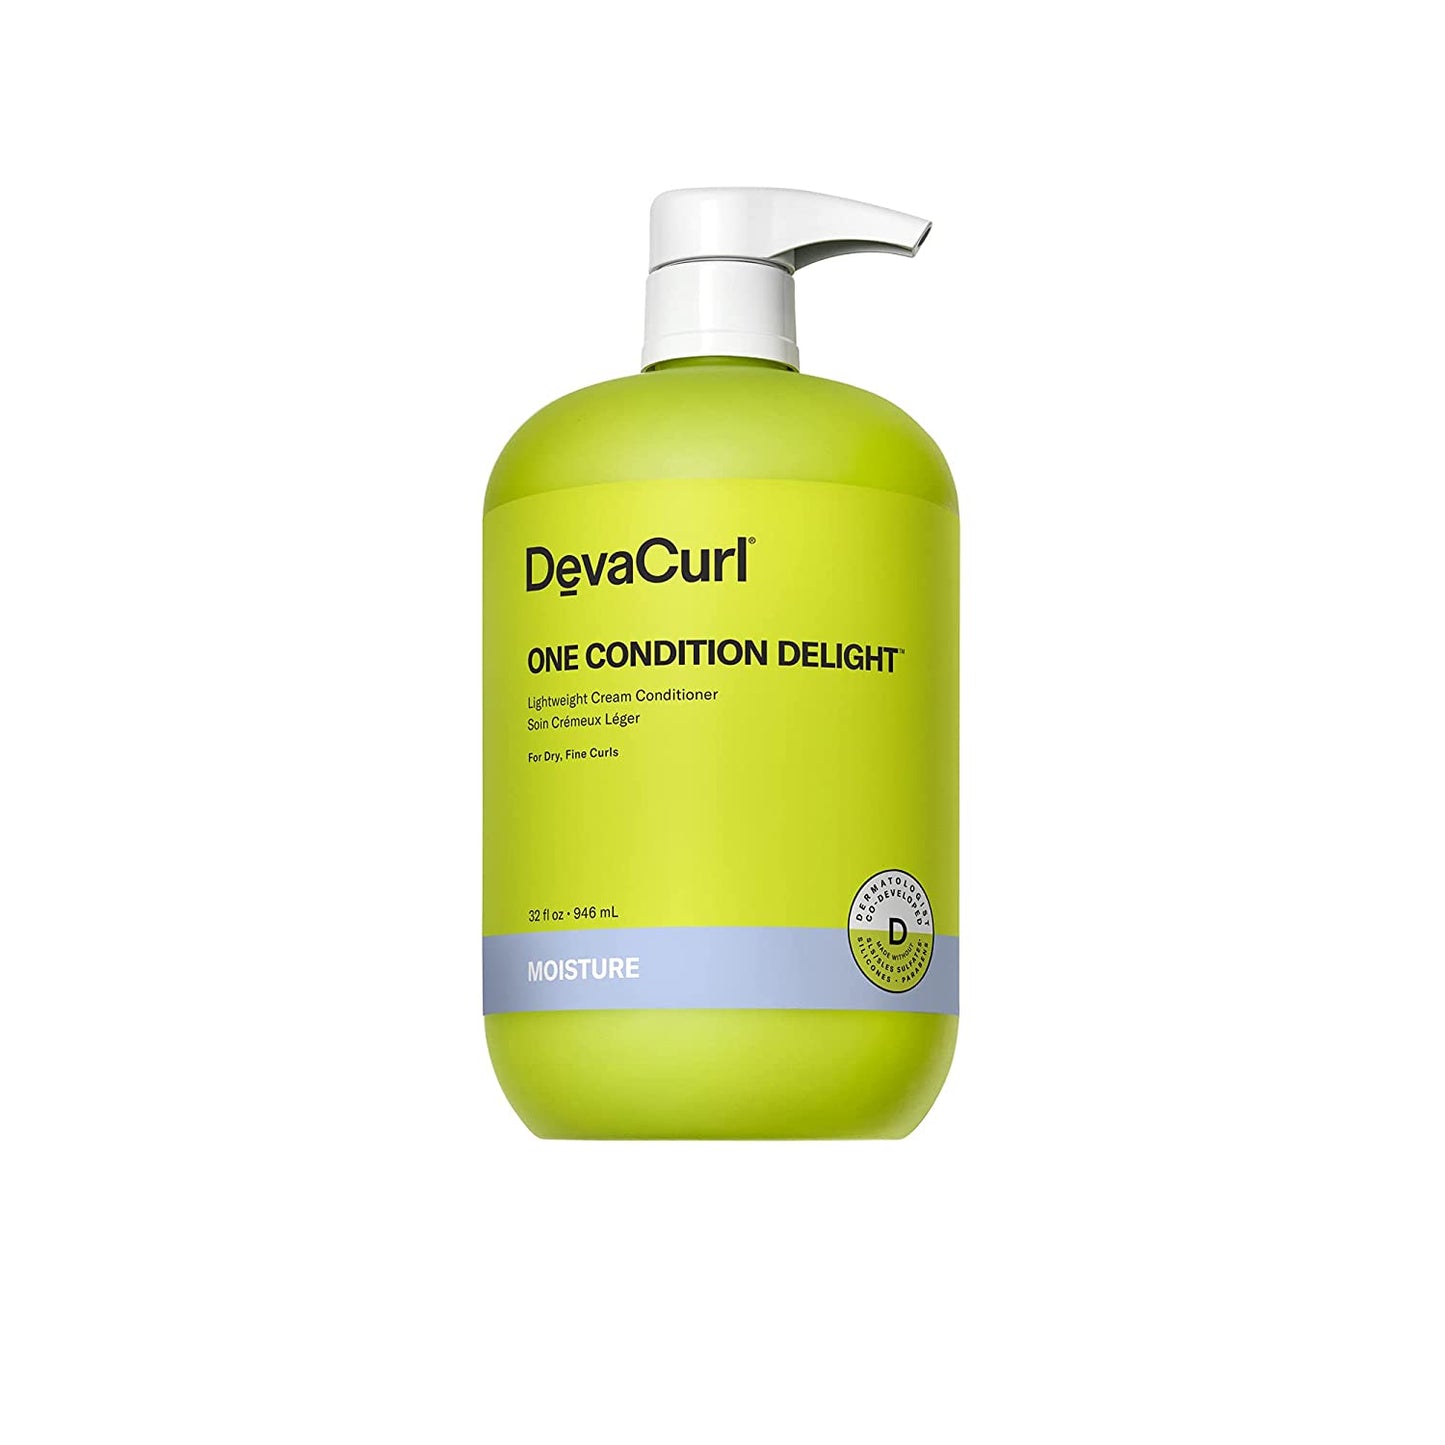 One Condition Delight Weightless Waves Conditioner